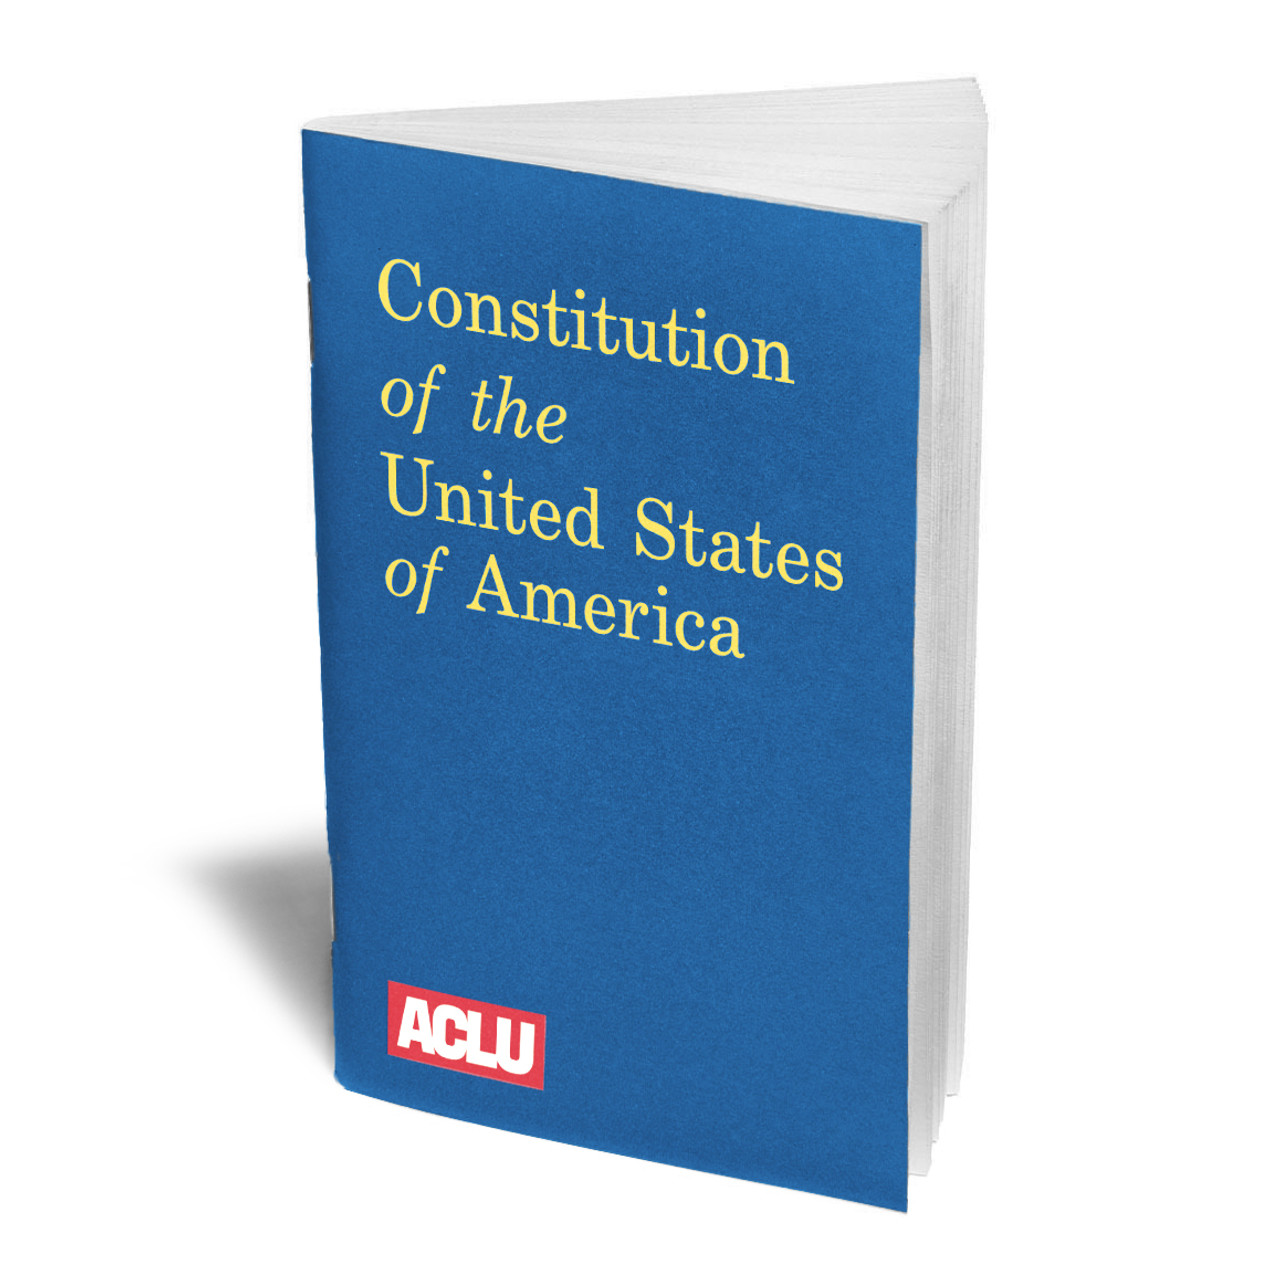 ACLU　10　States　of　Pocket　United　Pack　Constitution　the